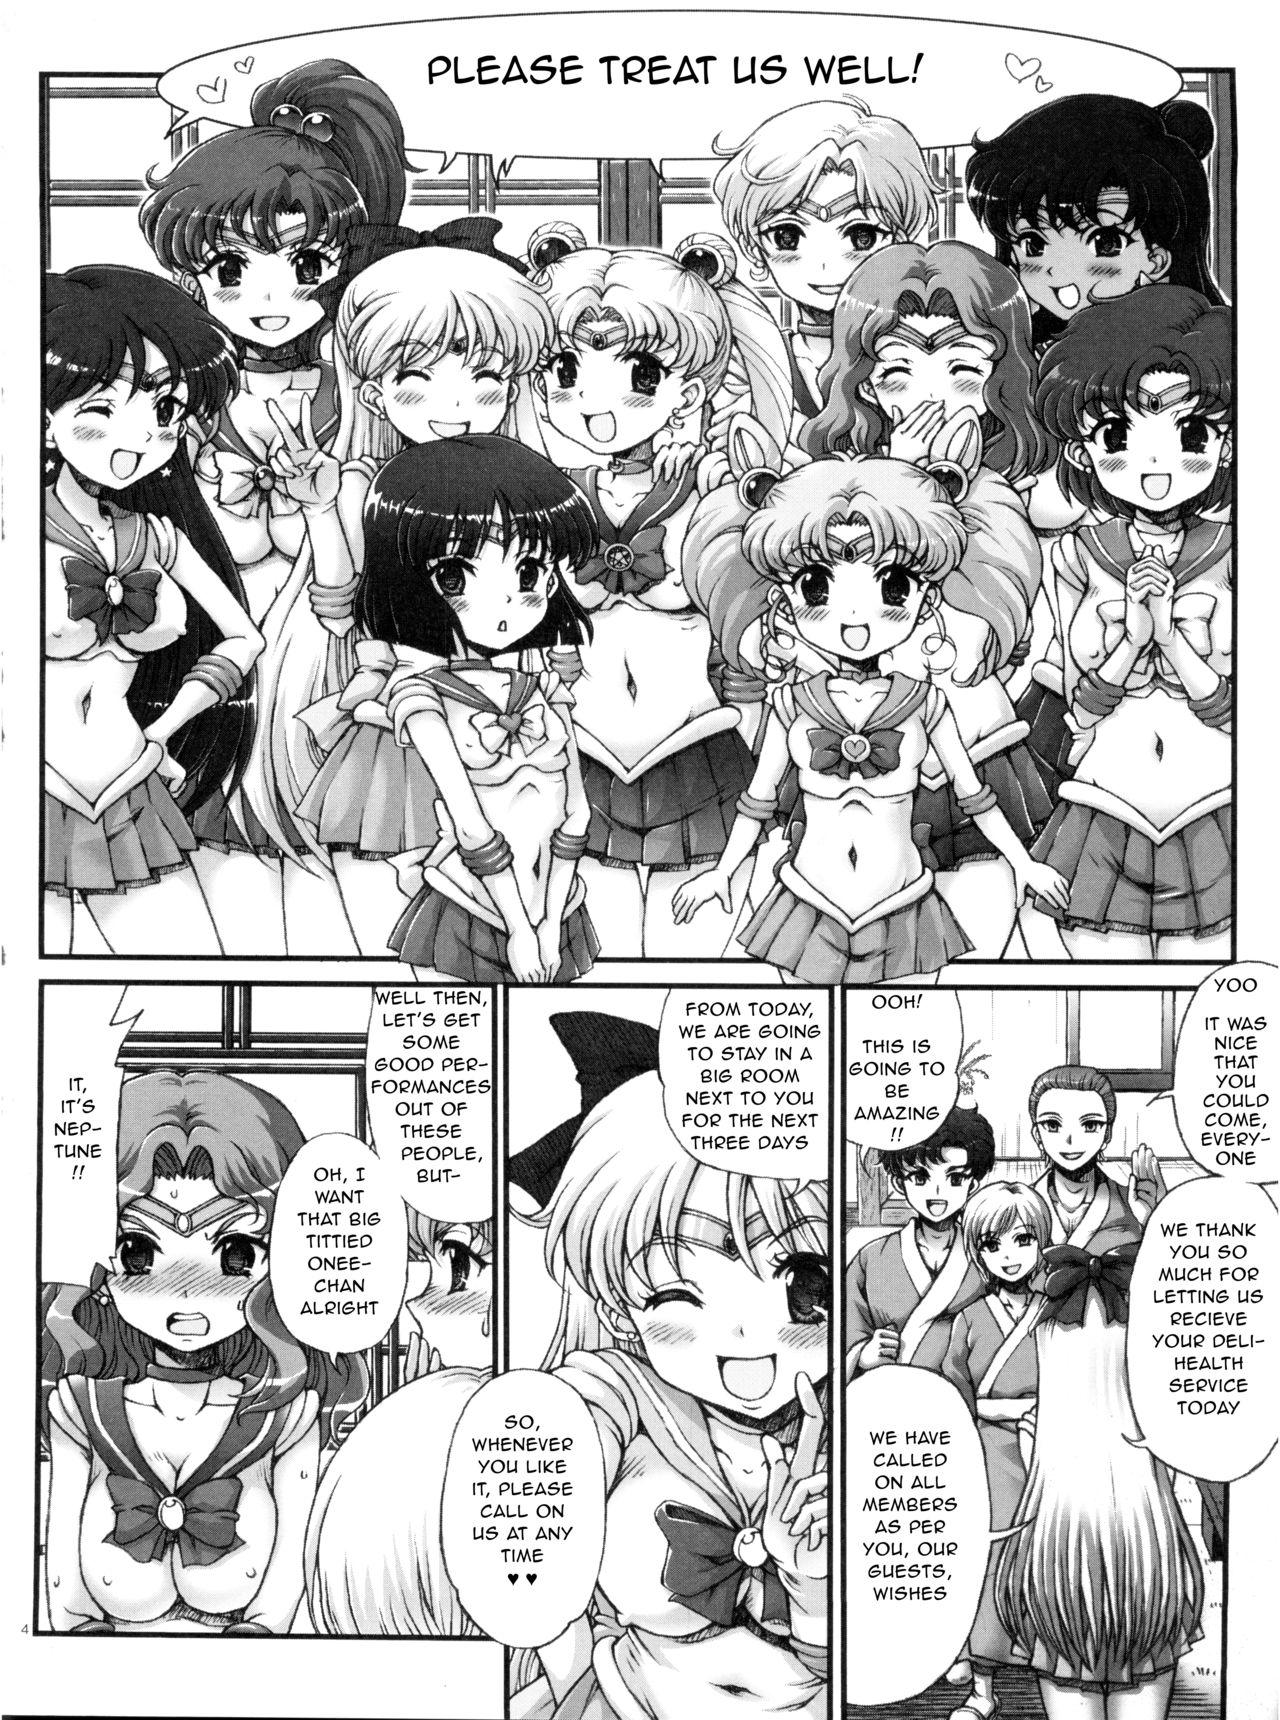 Missionary Position Porn Sailor Delivery Health All Stars - Sailor moon Guys - Page 3